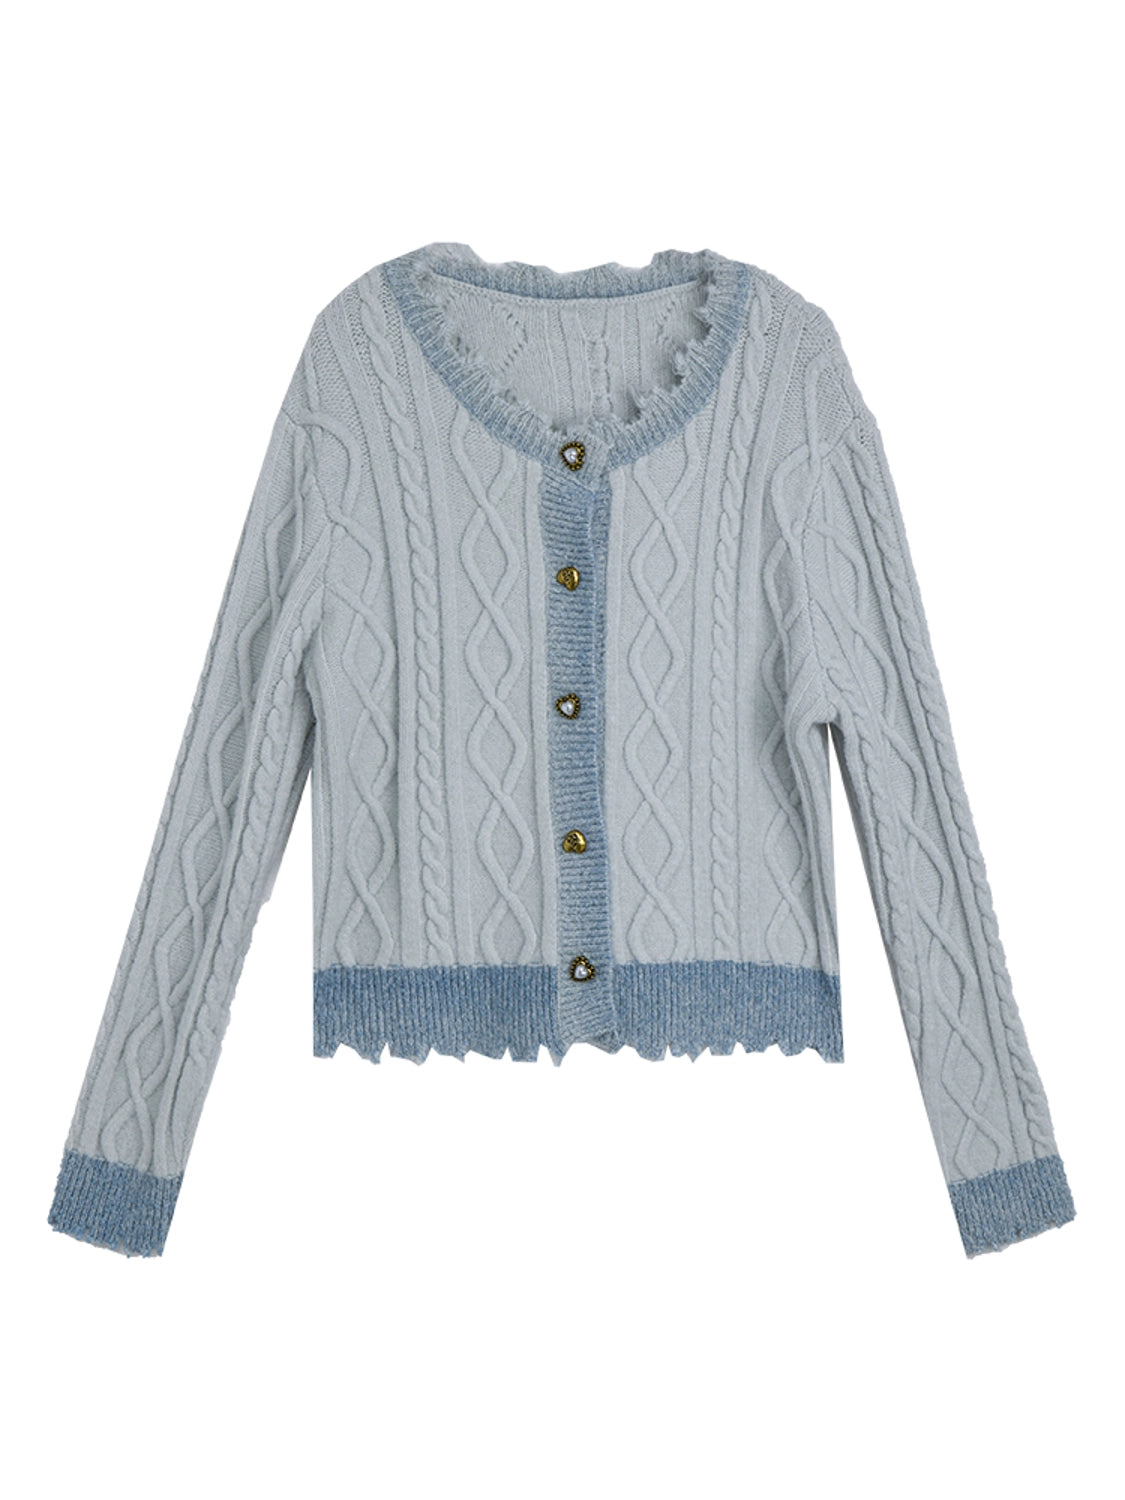 Women's Classic Cable Knit Cardigan with Chic Contrast Trim and Elegant Button Detail